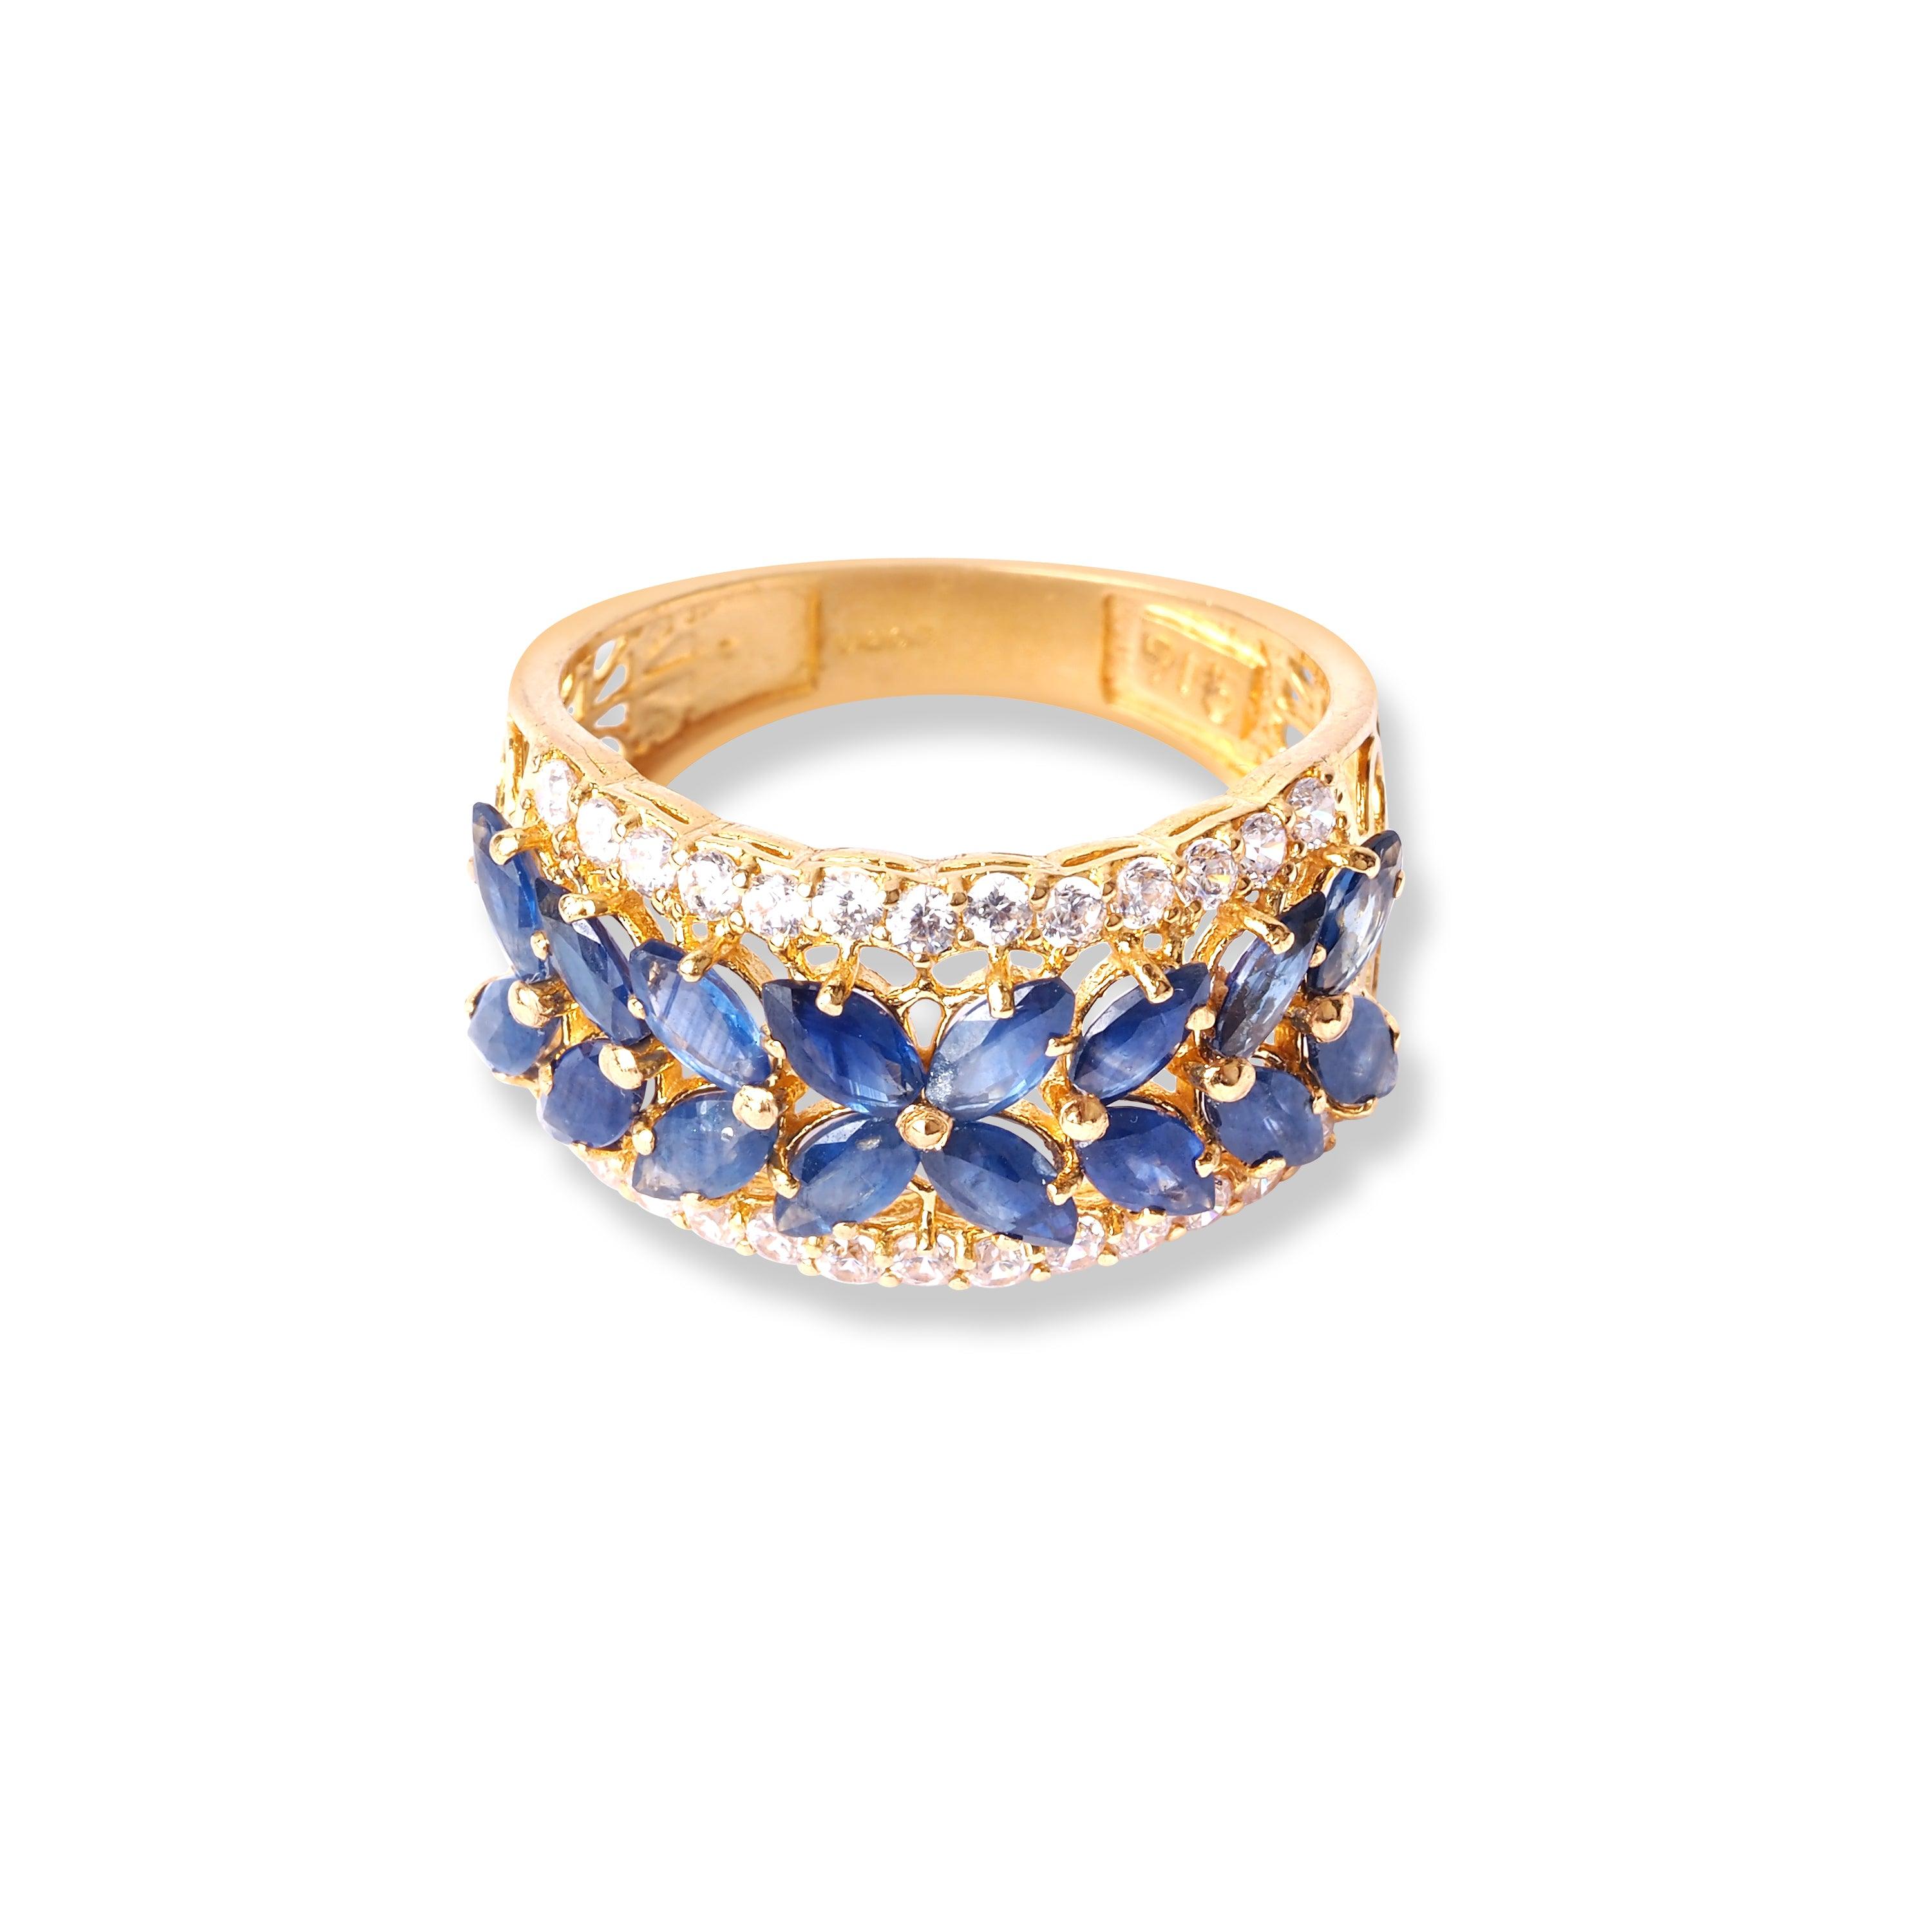 22ct Gold Ring With Blue Coloured Stones & Cubic Zirconia Stones (4.7g) LR-6597 - Minar Jewellers